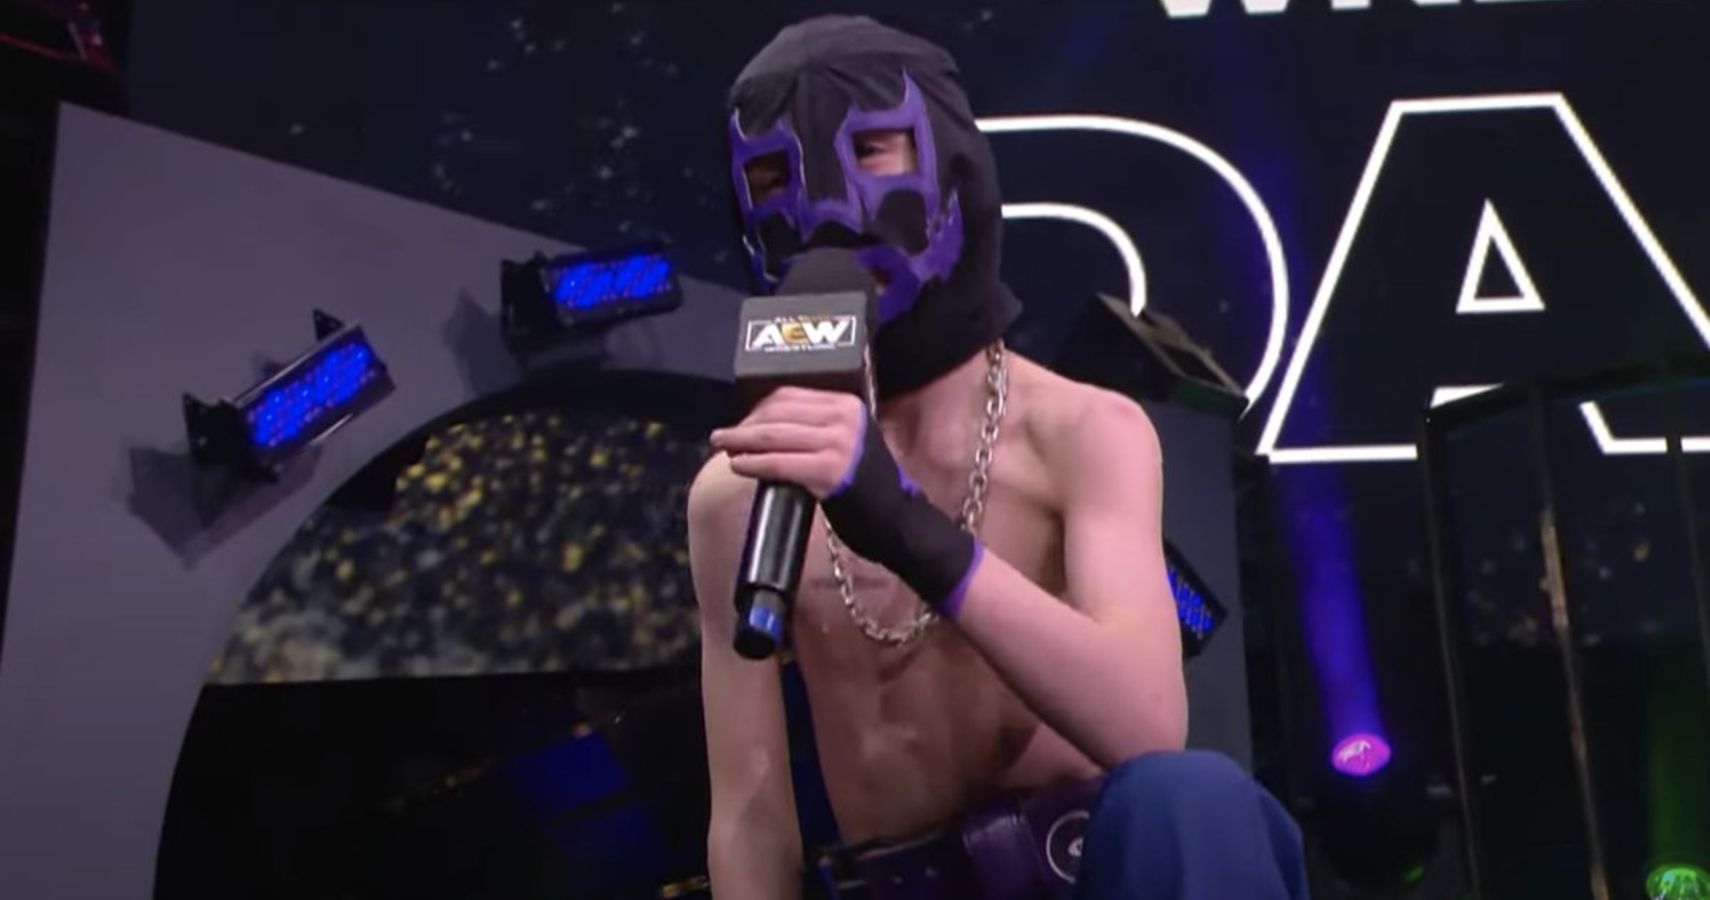 Brodie Huber Jr aka Negative 1 with comemorating the death of his late father Jon Huber aka Brodie Lee on AEW Dynamite